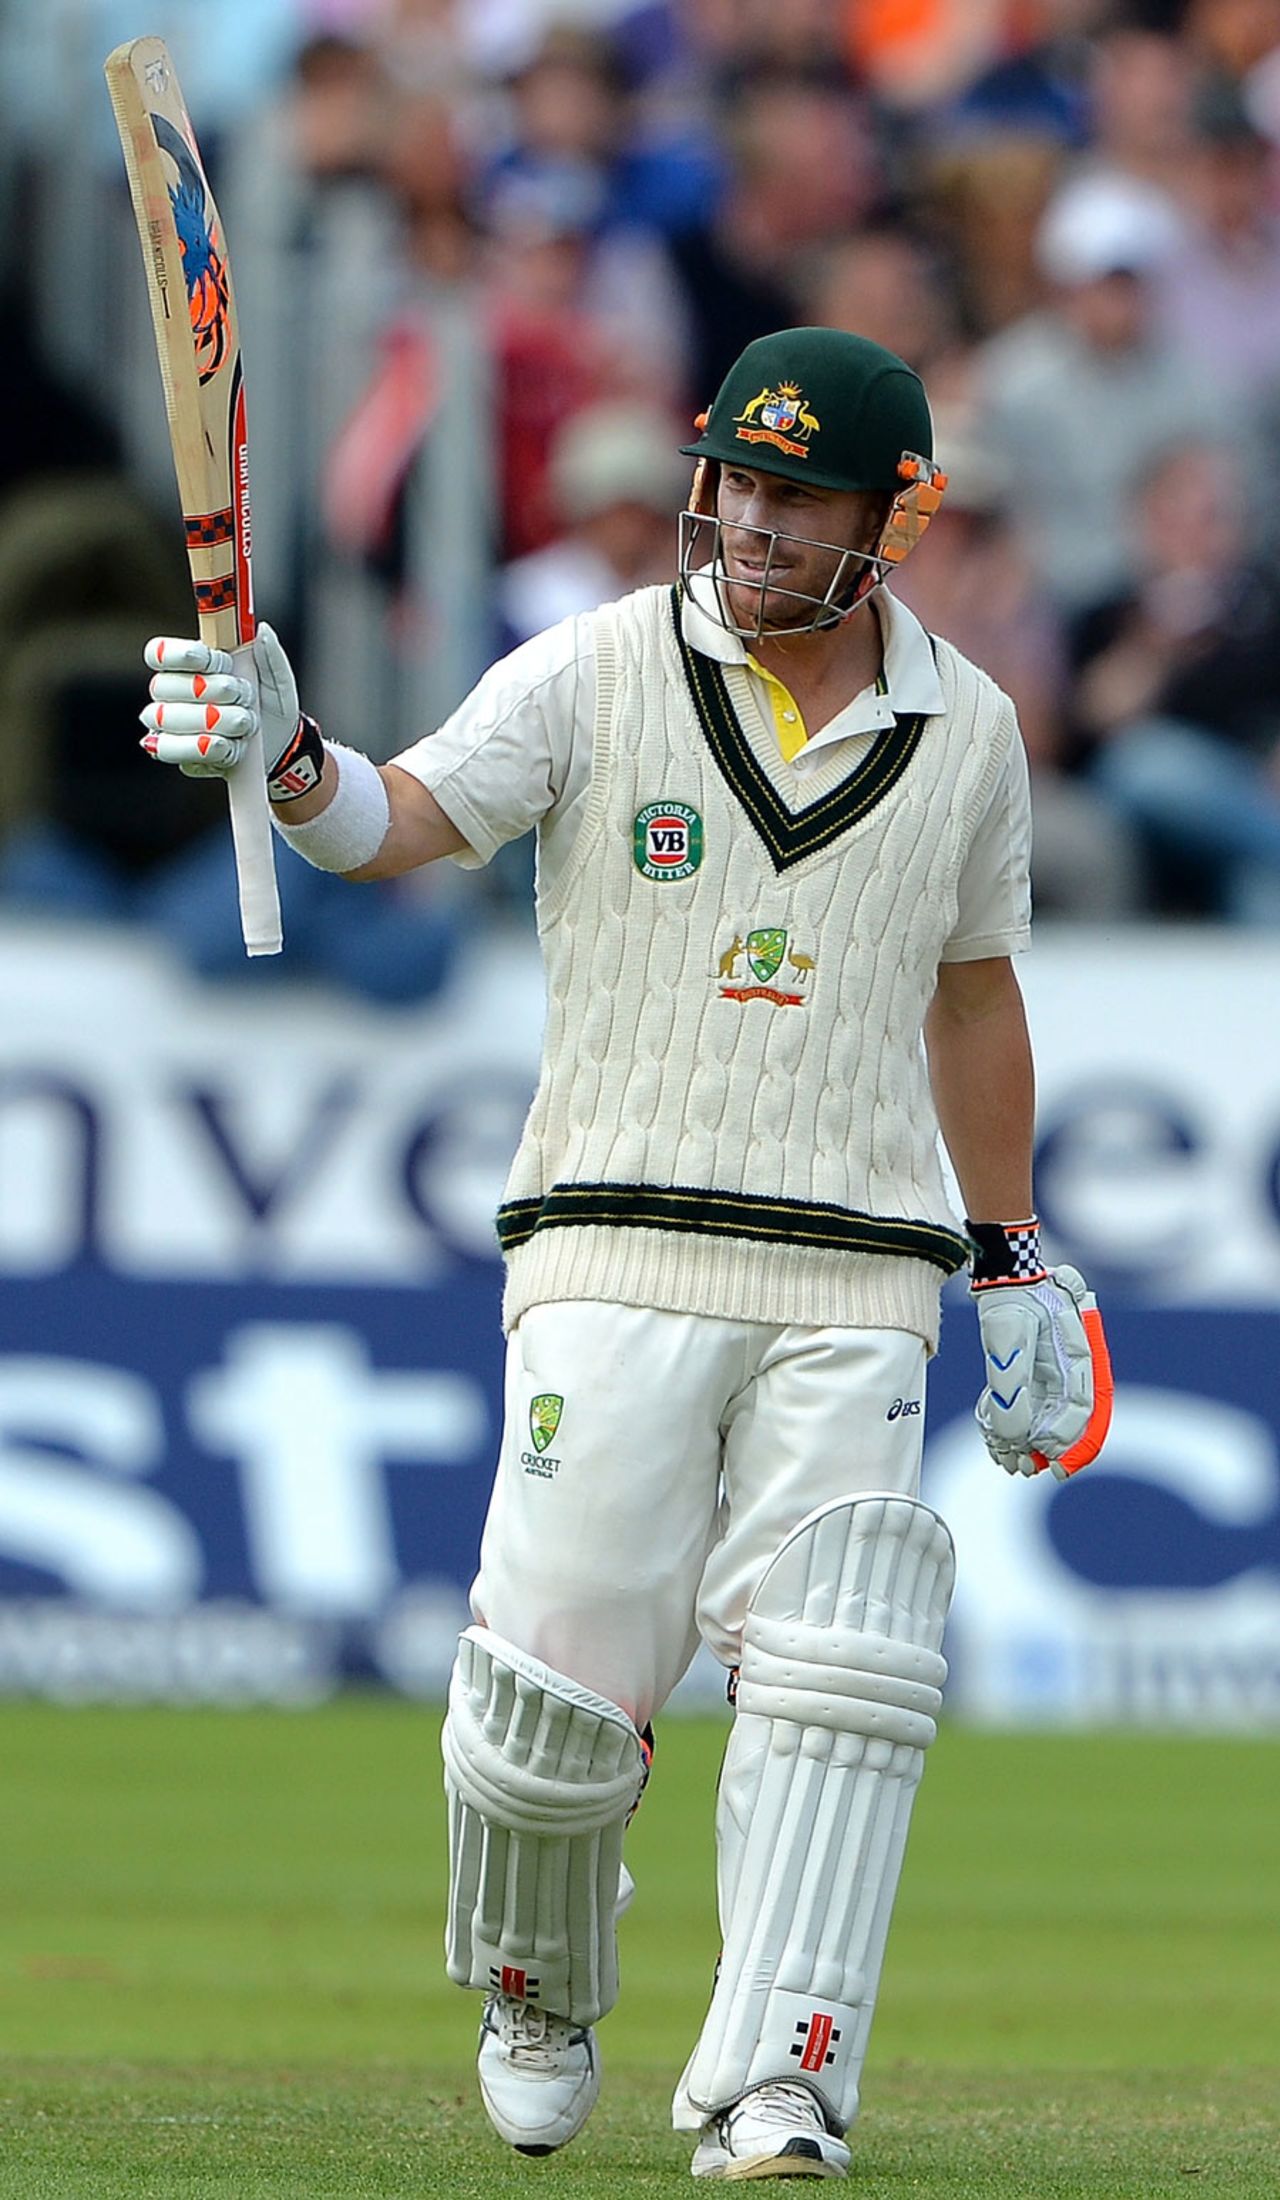 David Warner made his first half-century in Ashes cricket, England v Australia, 4th Investec Test, 4th day, Chester-le-Street, August 12, 2013